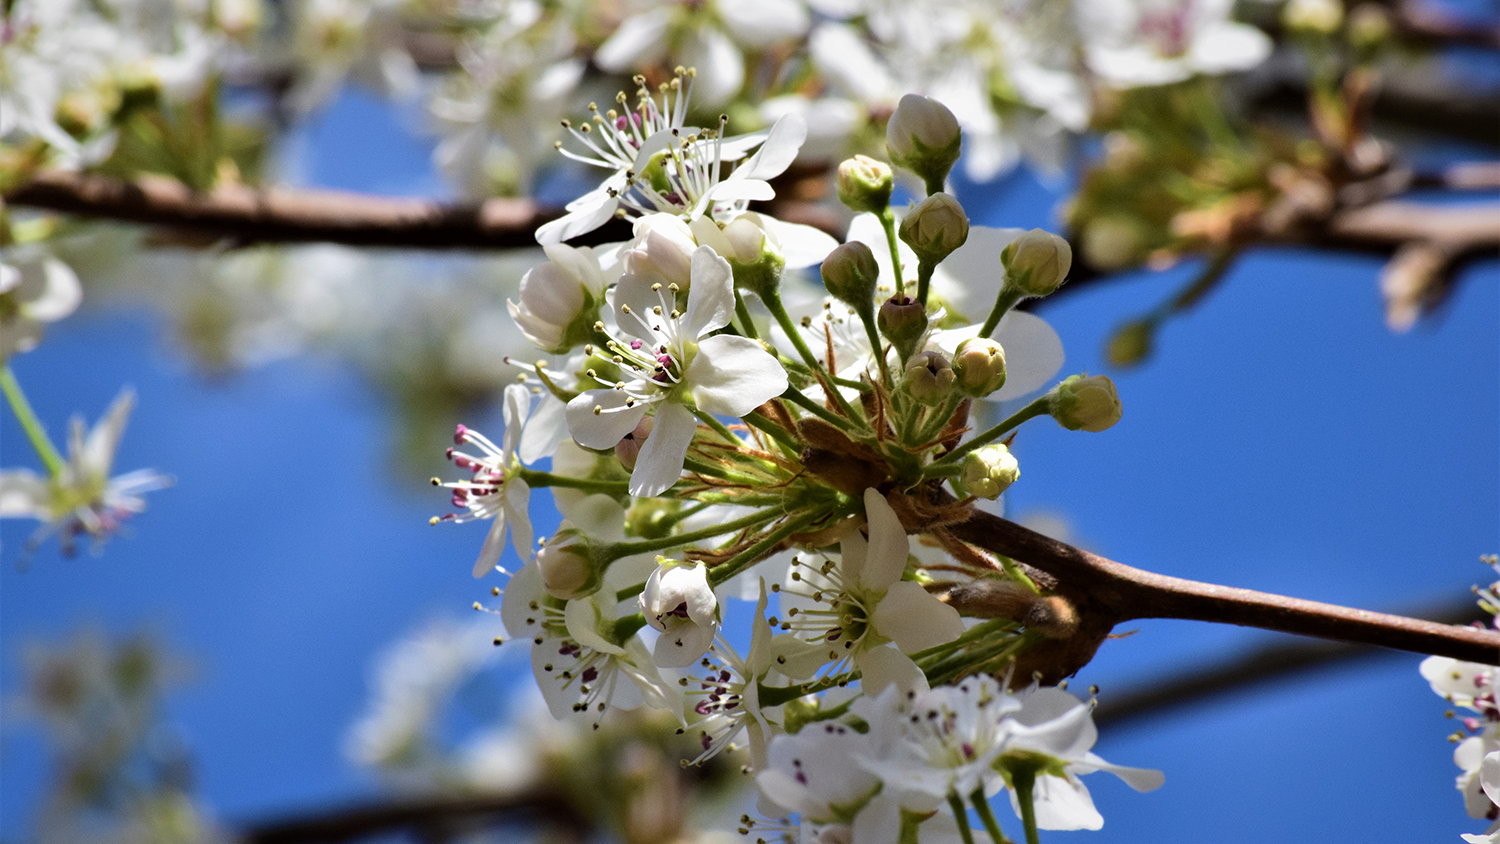 A white flower blooming on a Bradford pear tree